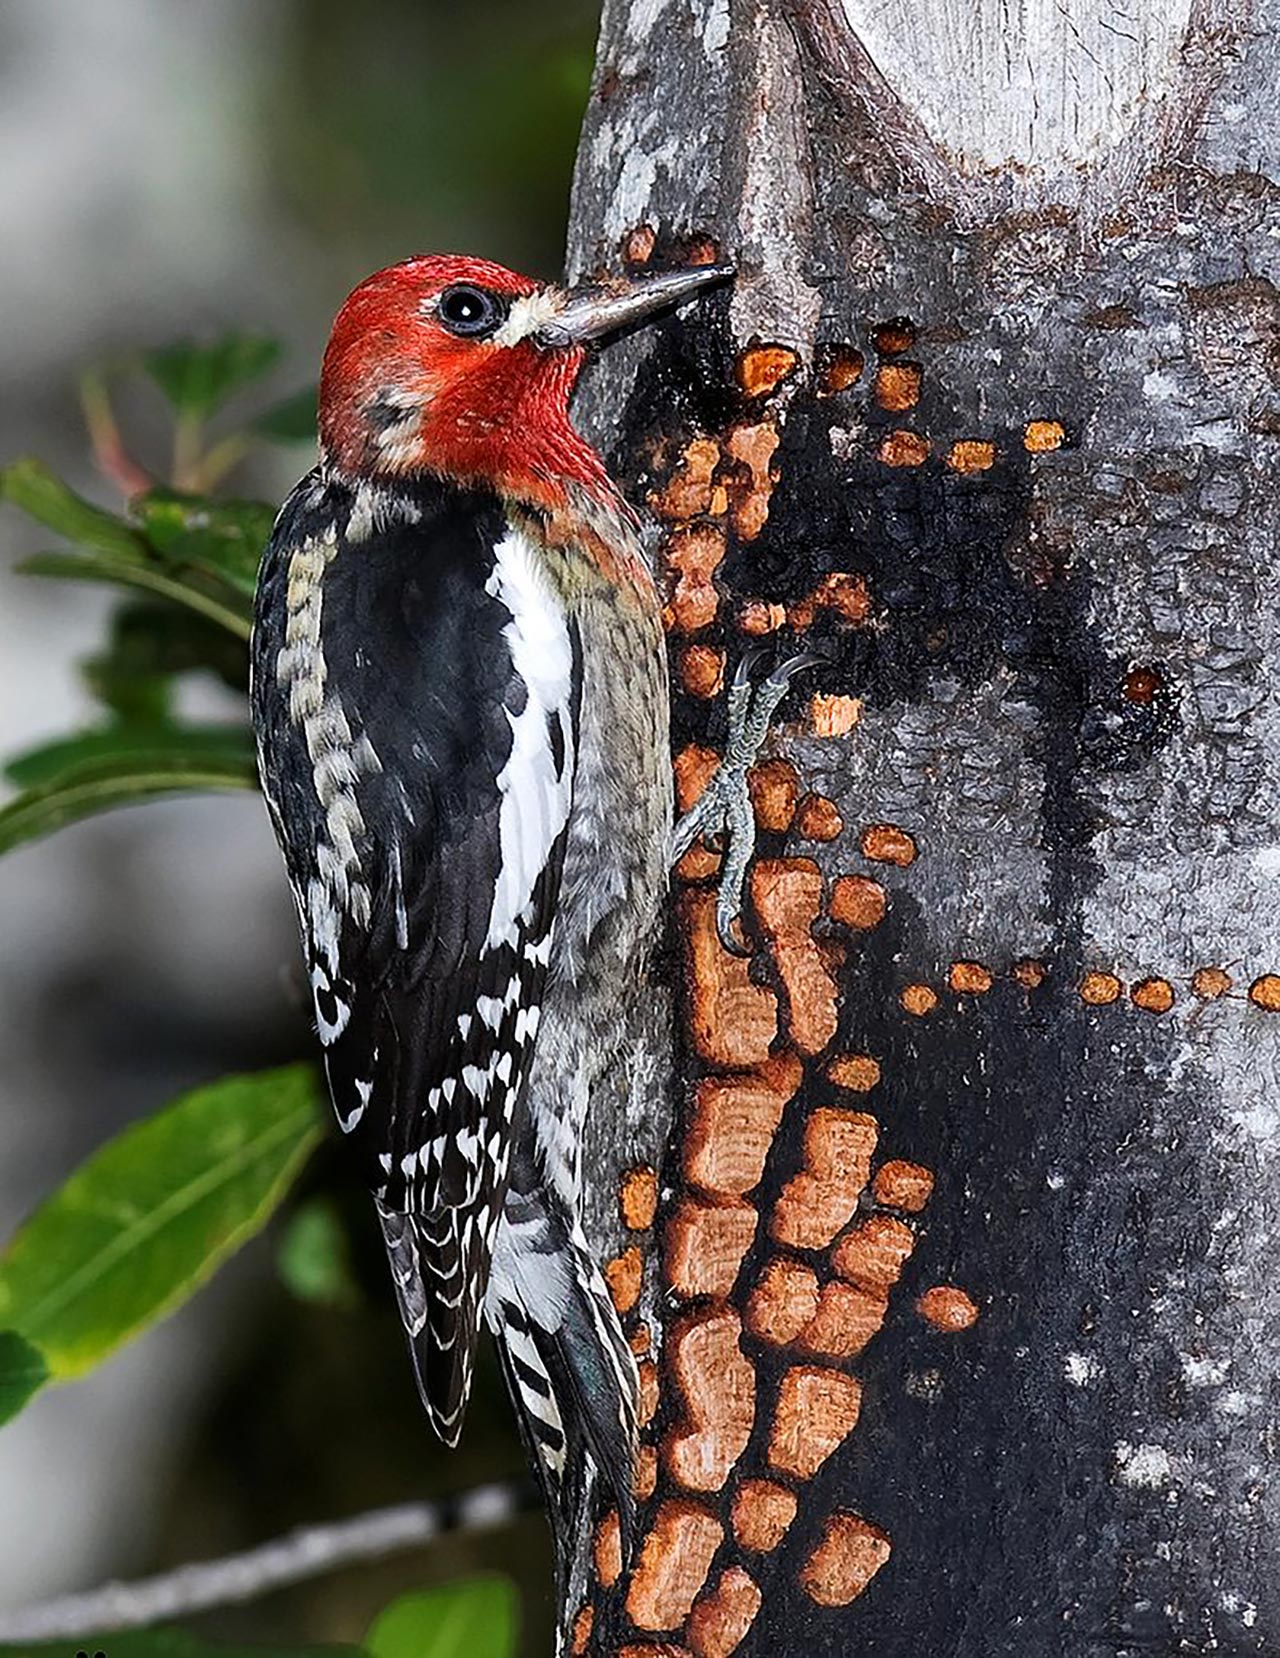 How many strokes does a woodpecker make in a second?